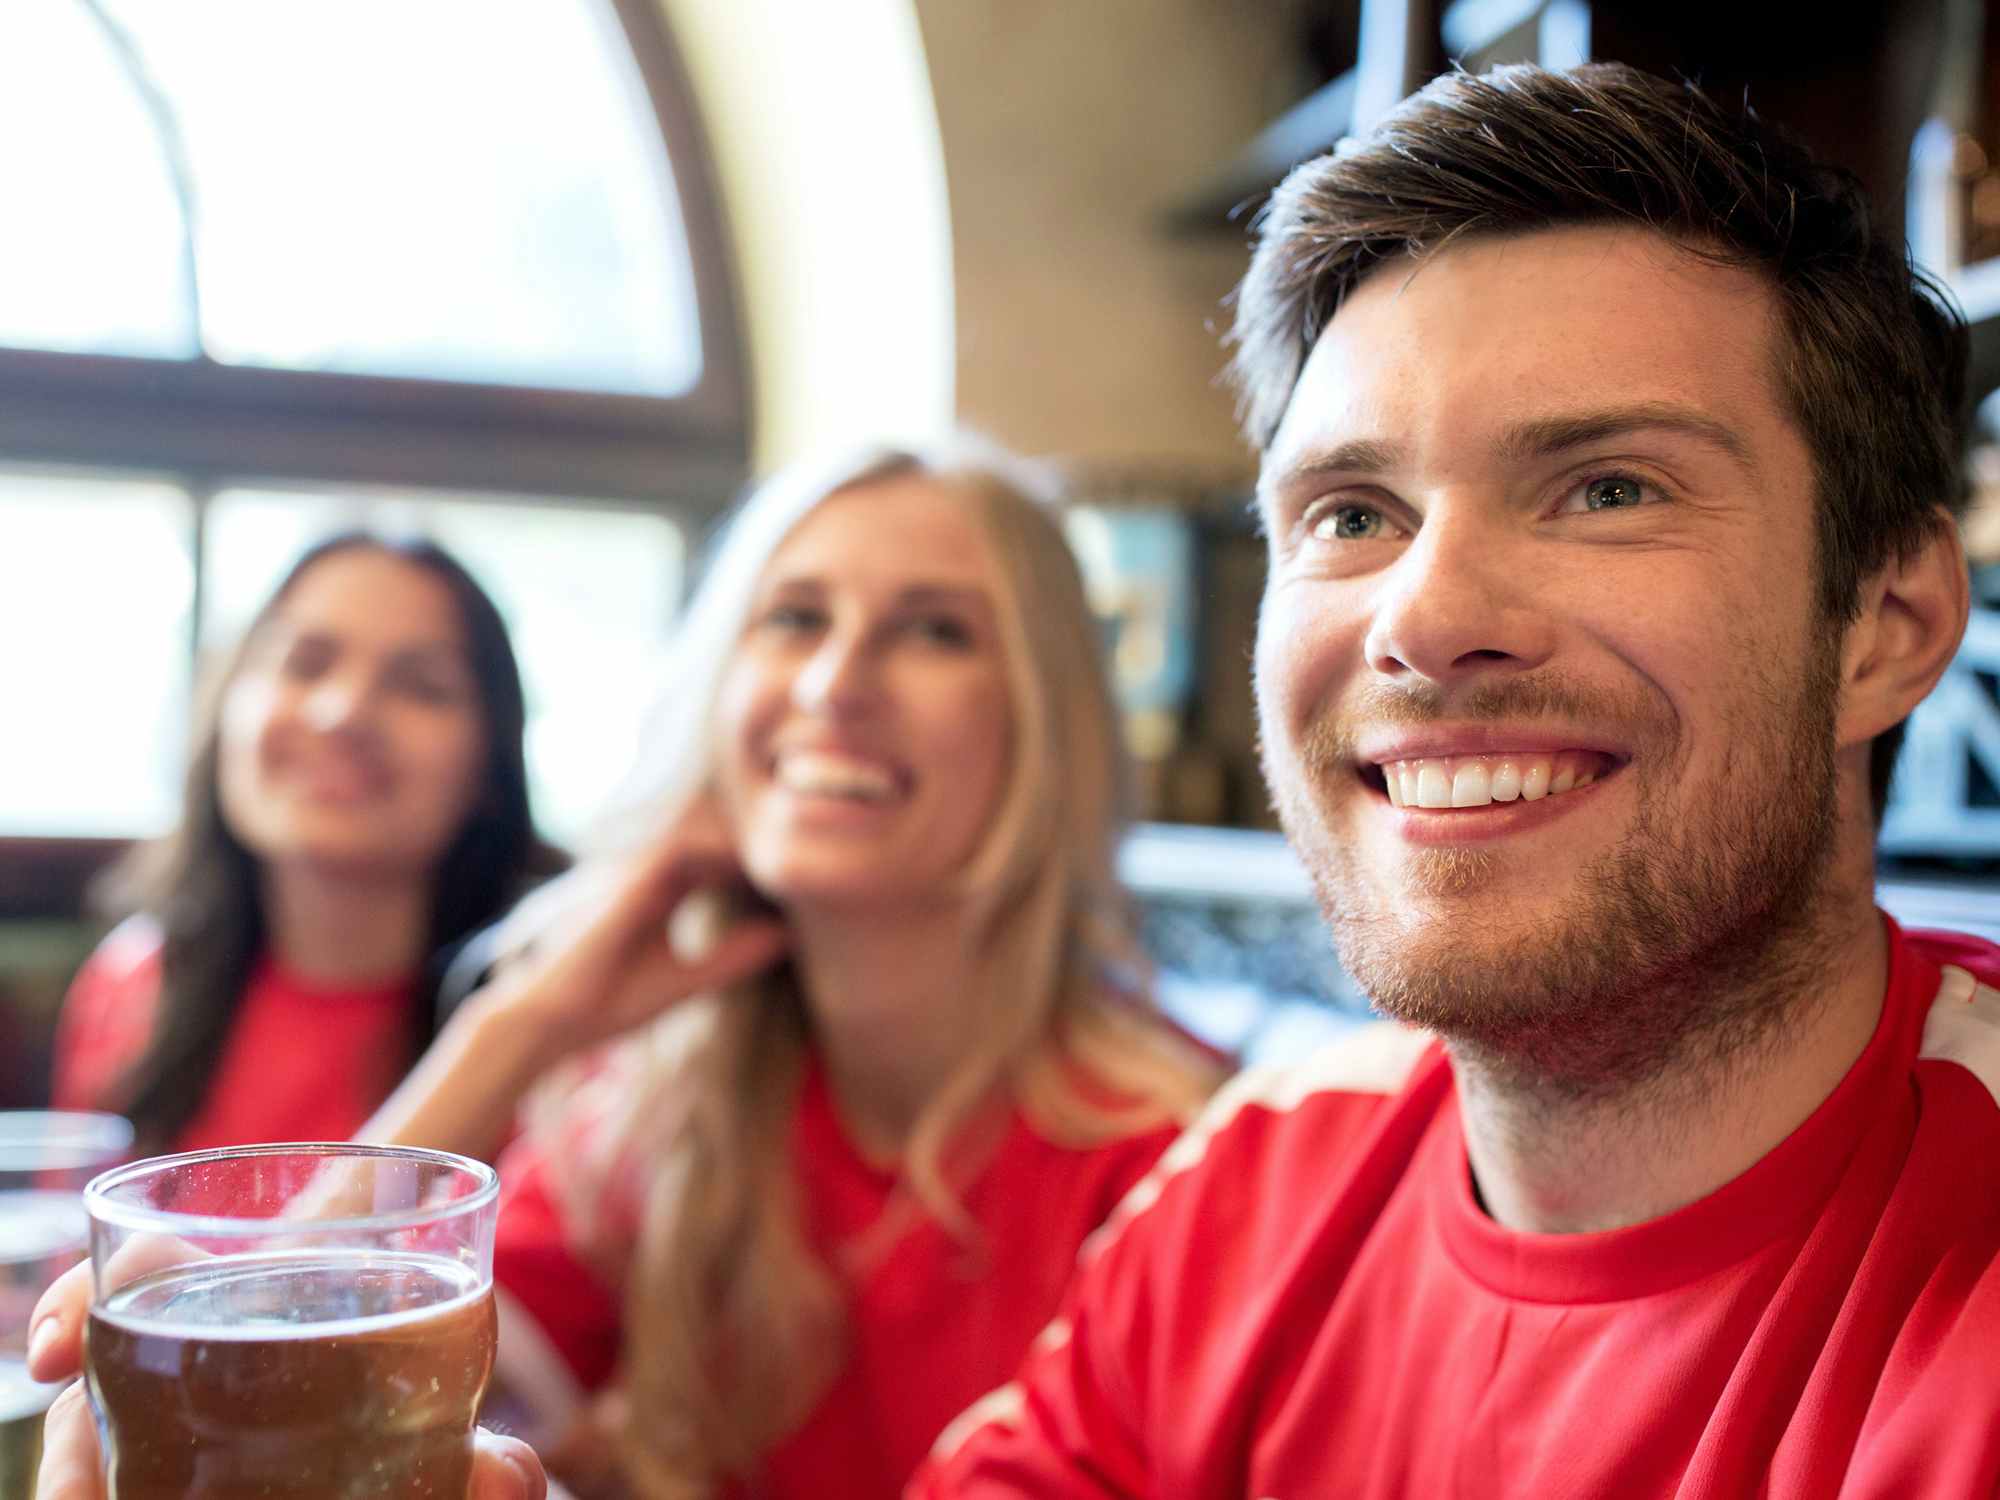 friends in red drinking beer and watching game at bar